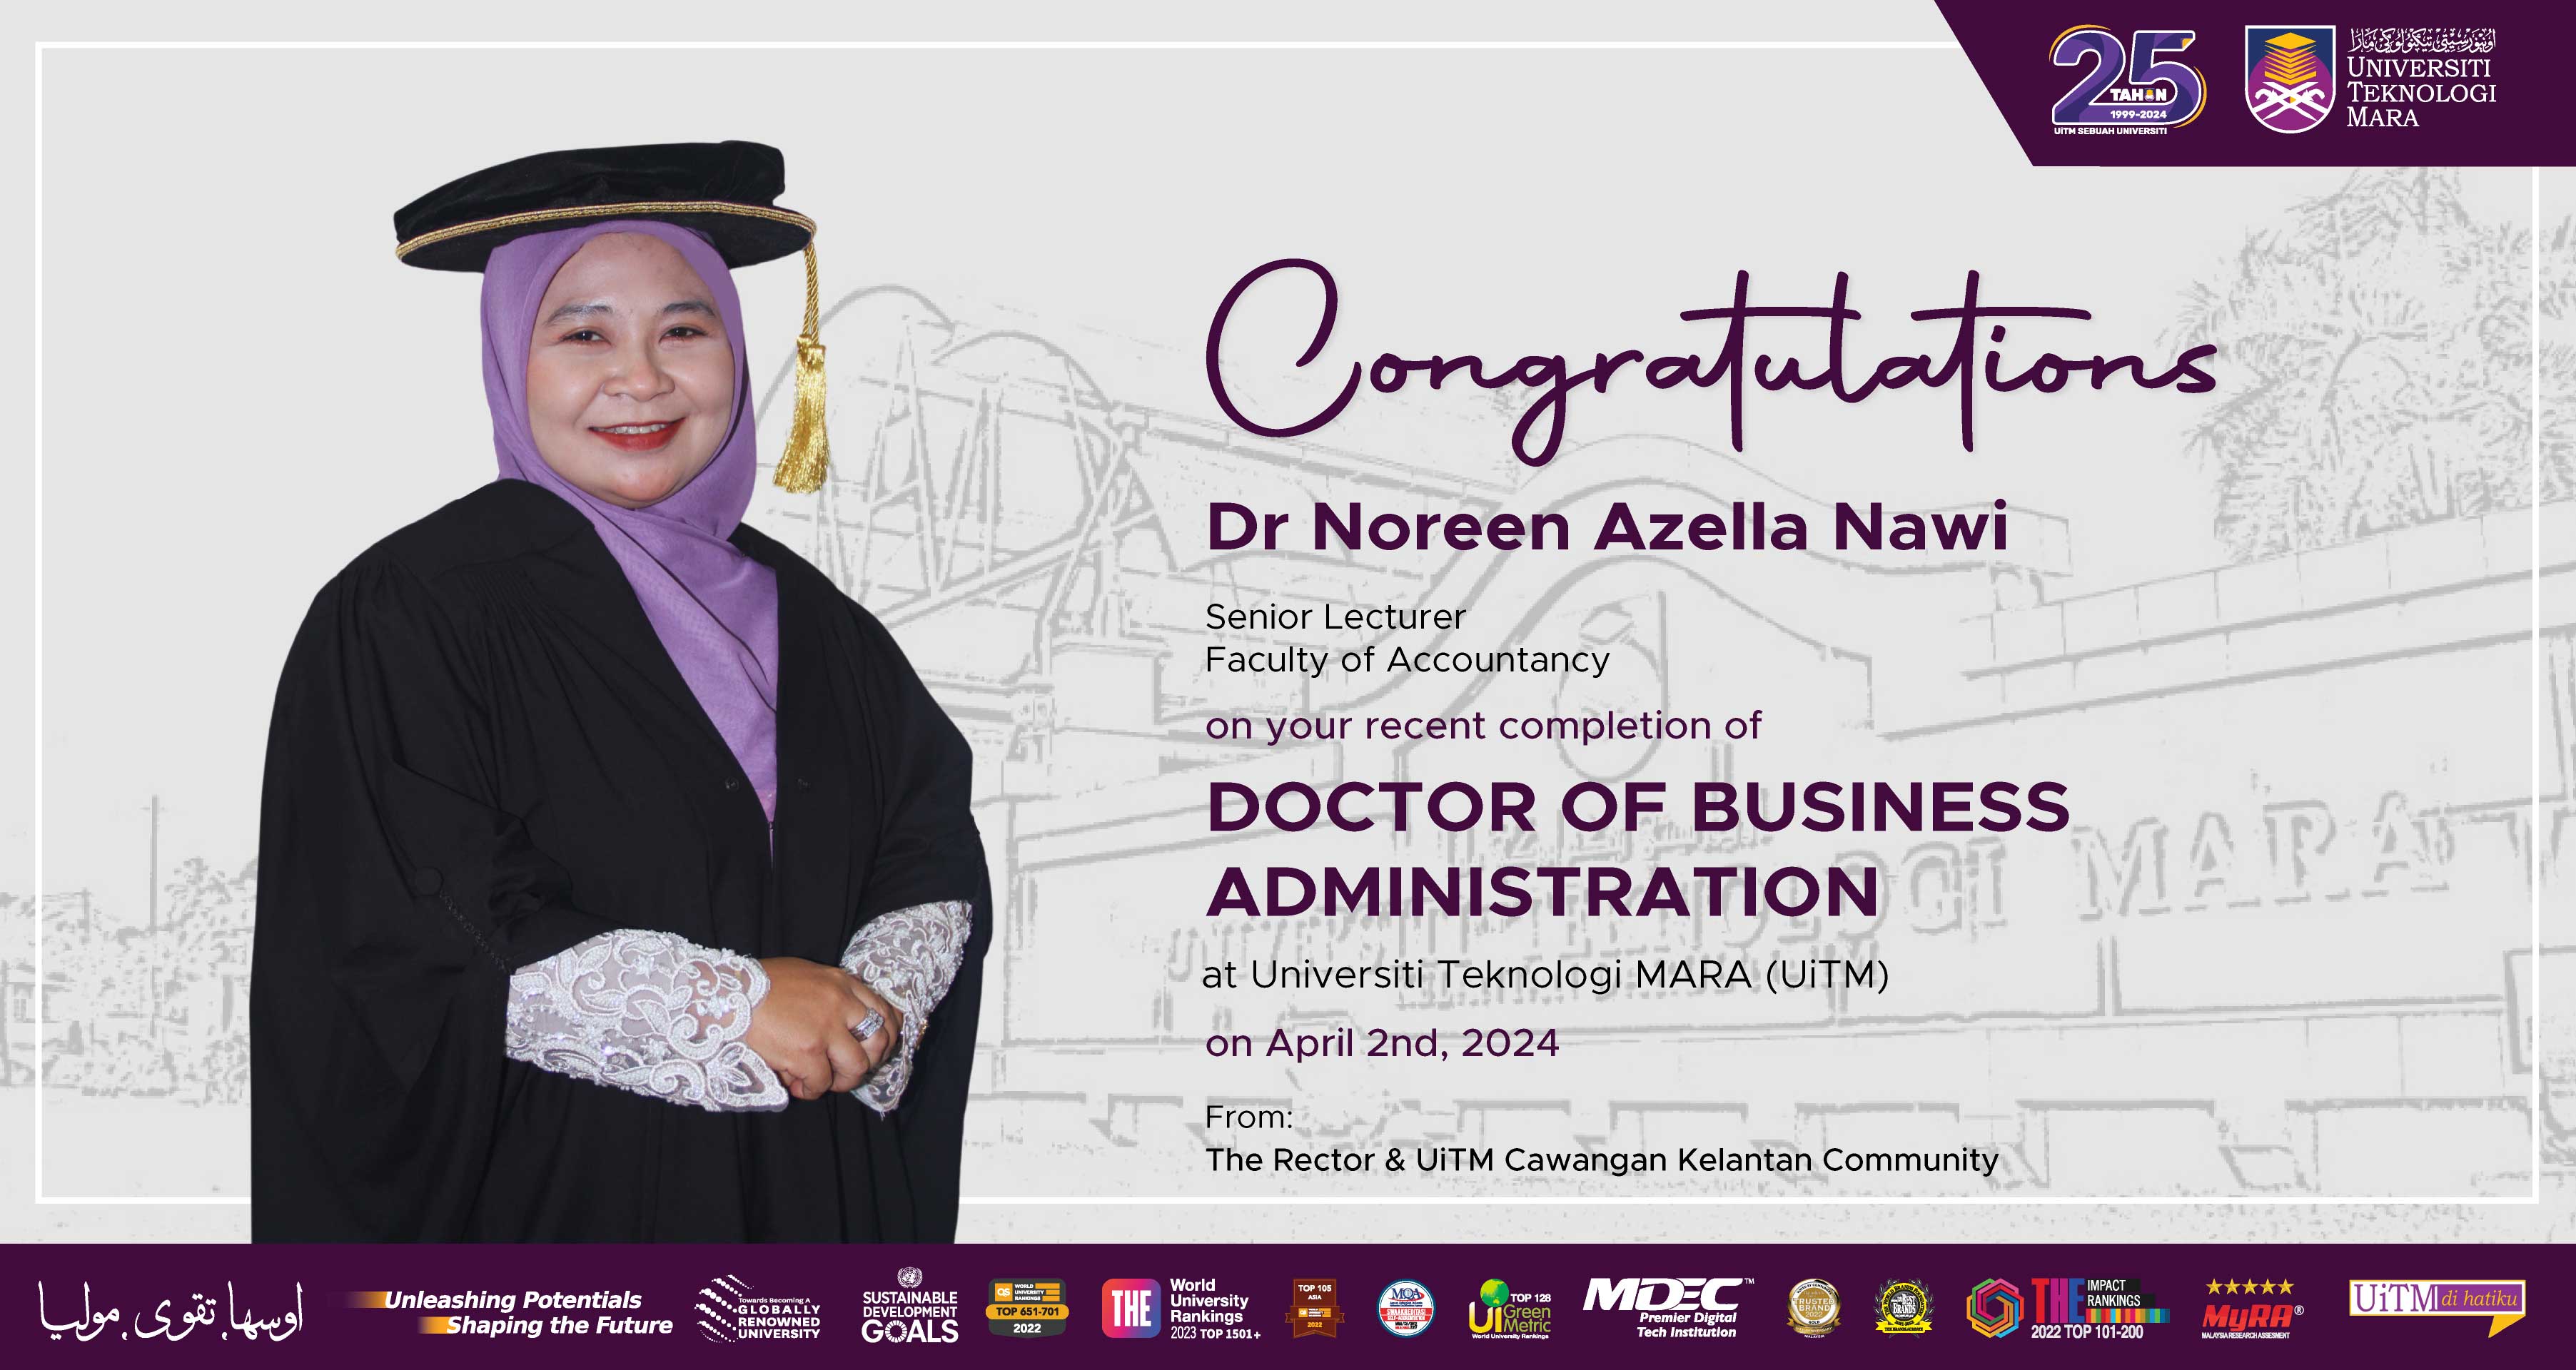 Congratulations!!! Dr Noreen Azella Nawi, Doctor of Business Administration